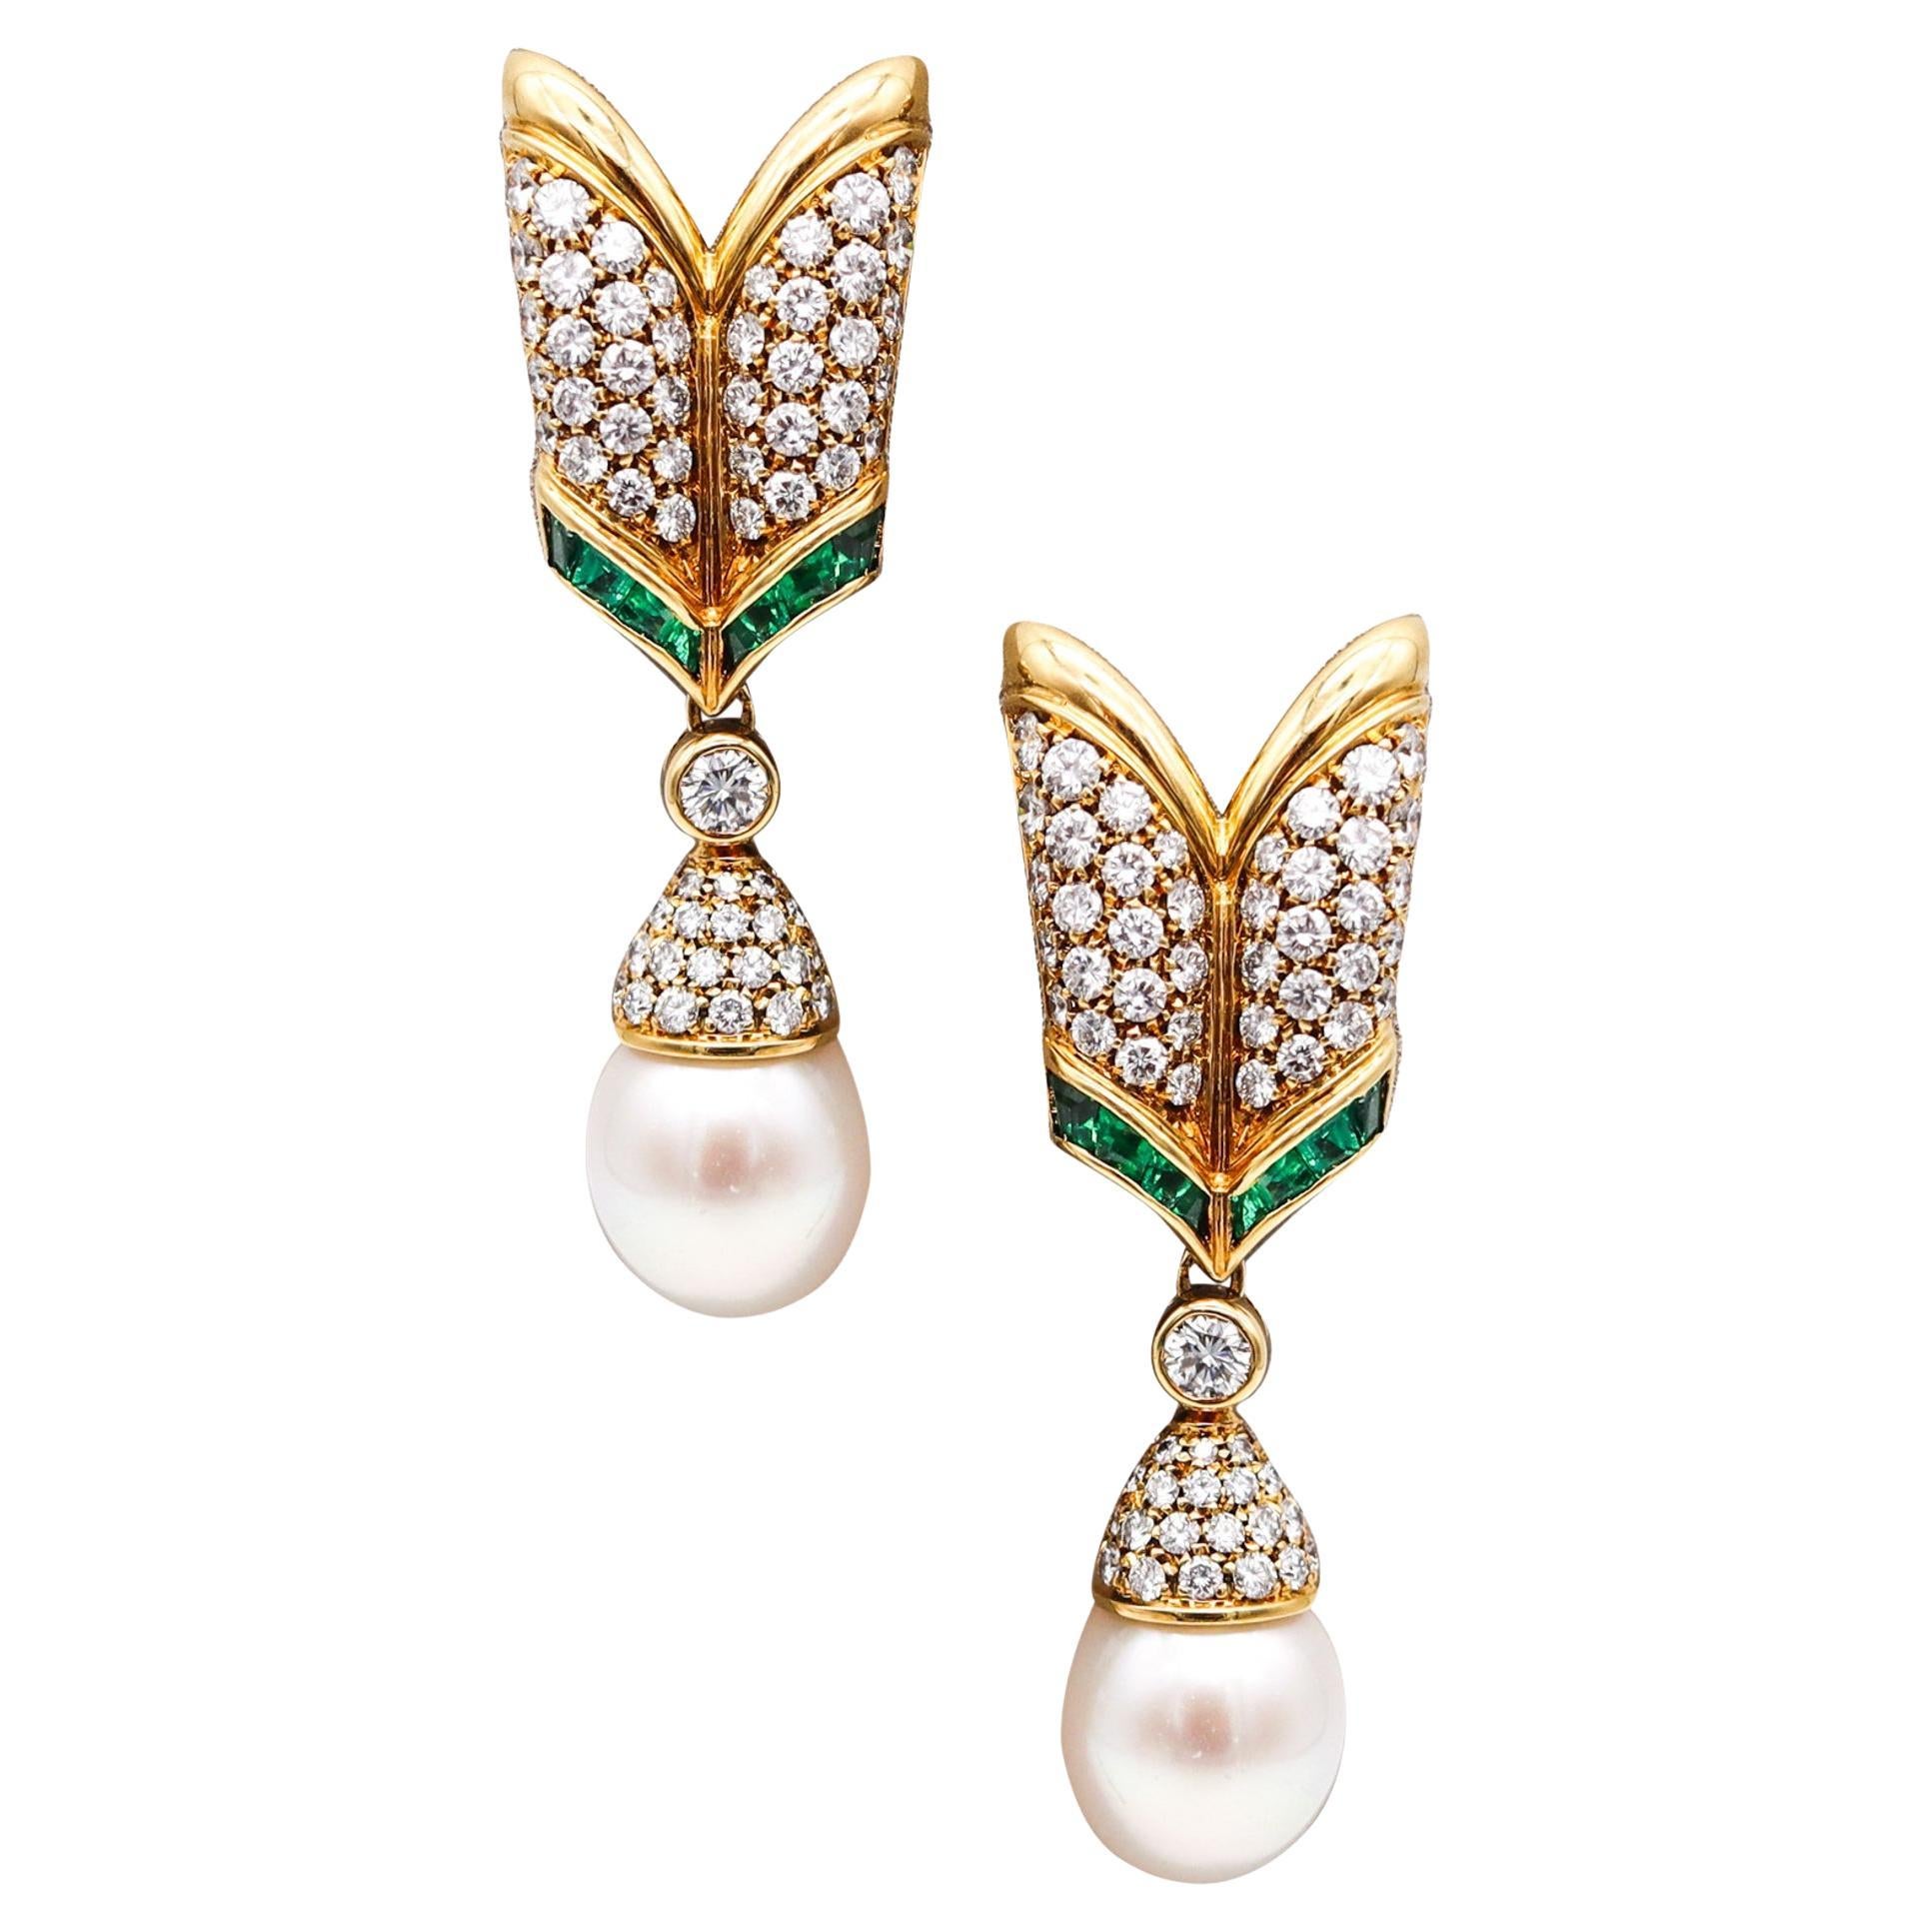 Picchiotti Dangle Drop Pearls Earrings 18Kt Gold 4.07 Ctw Diamonds And Emeralds For Sale